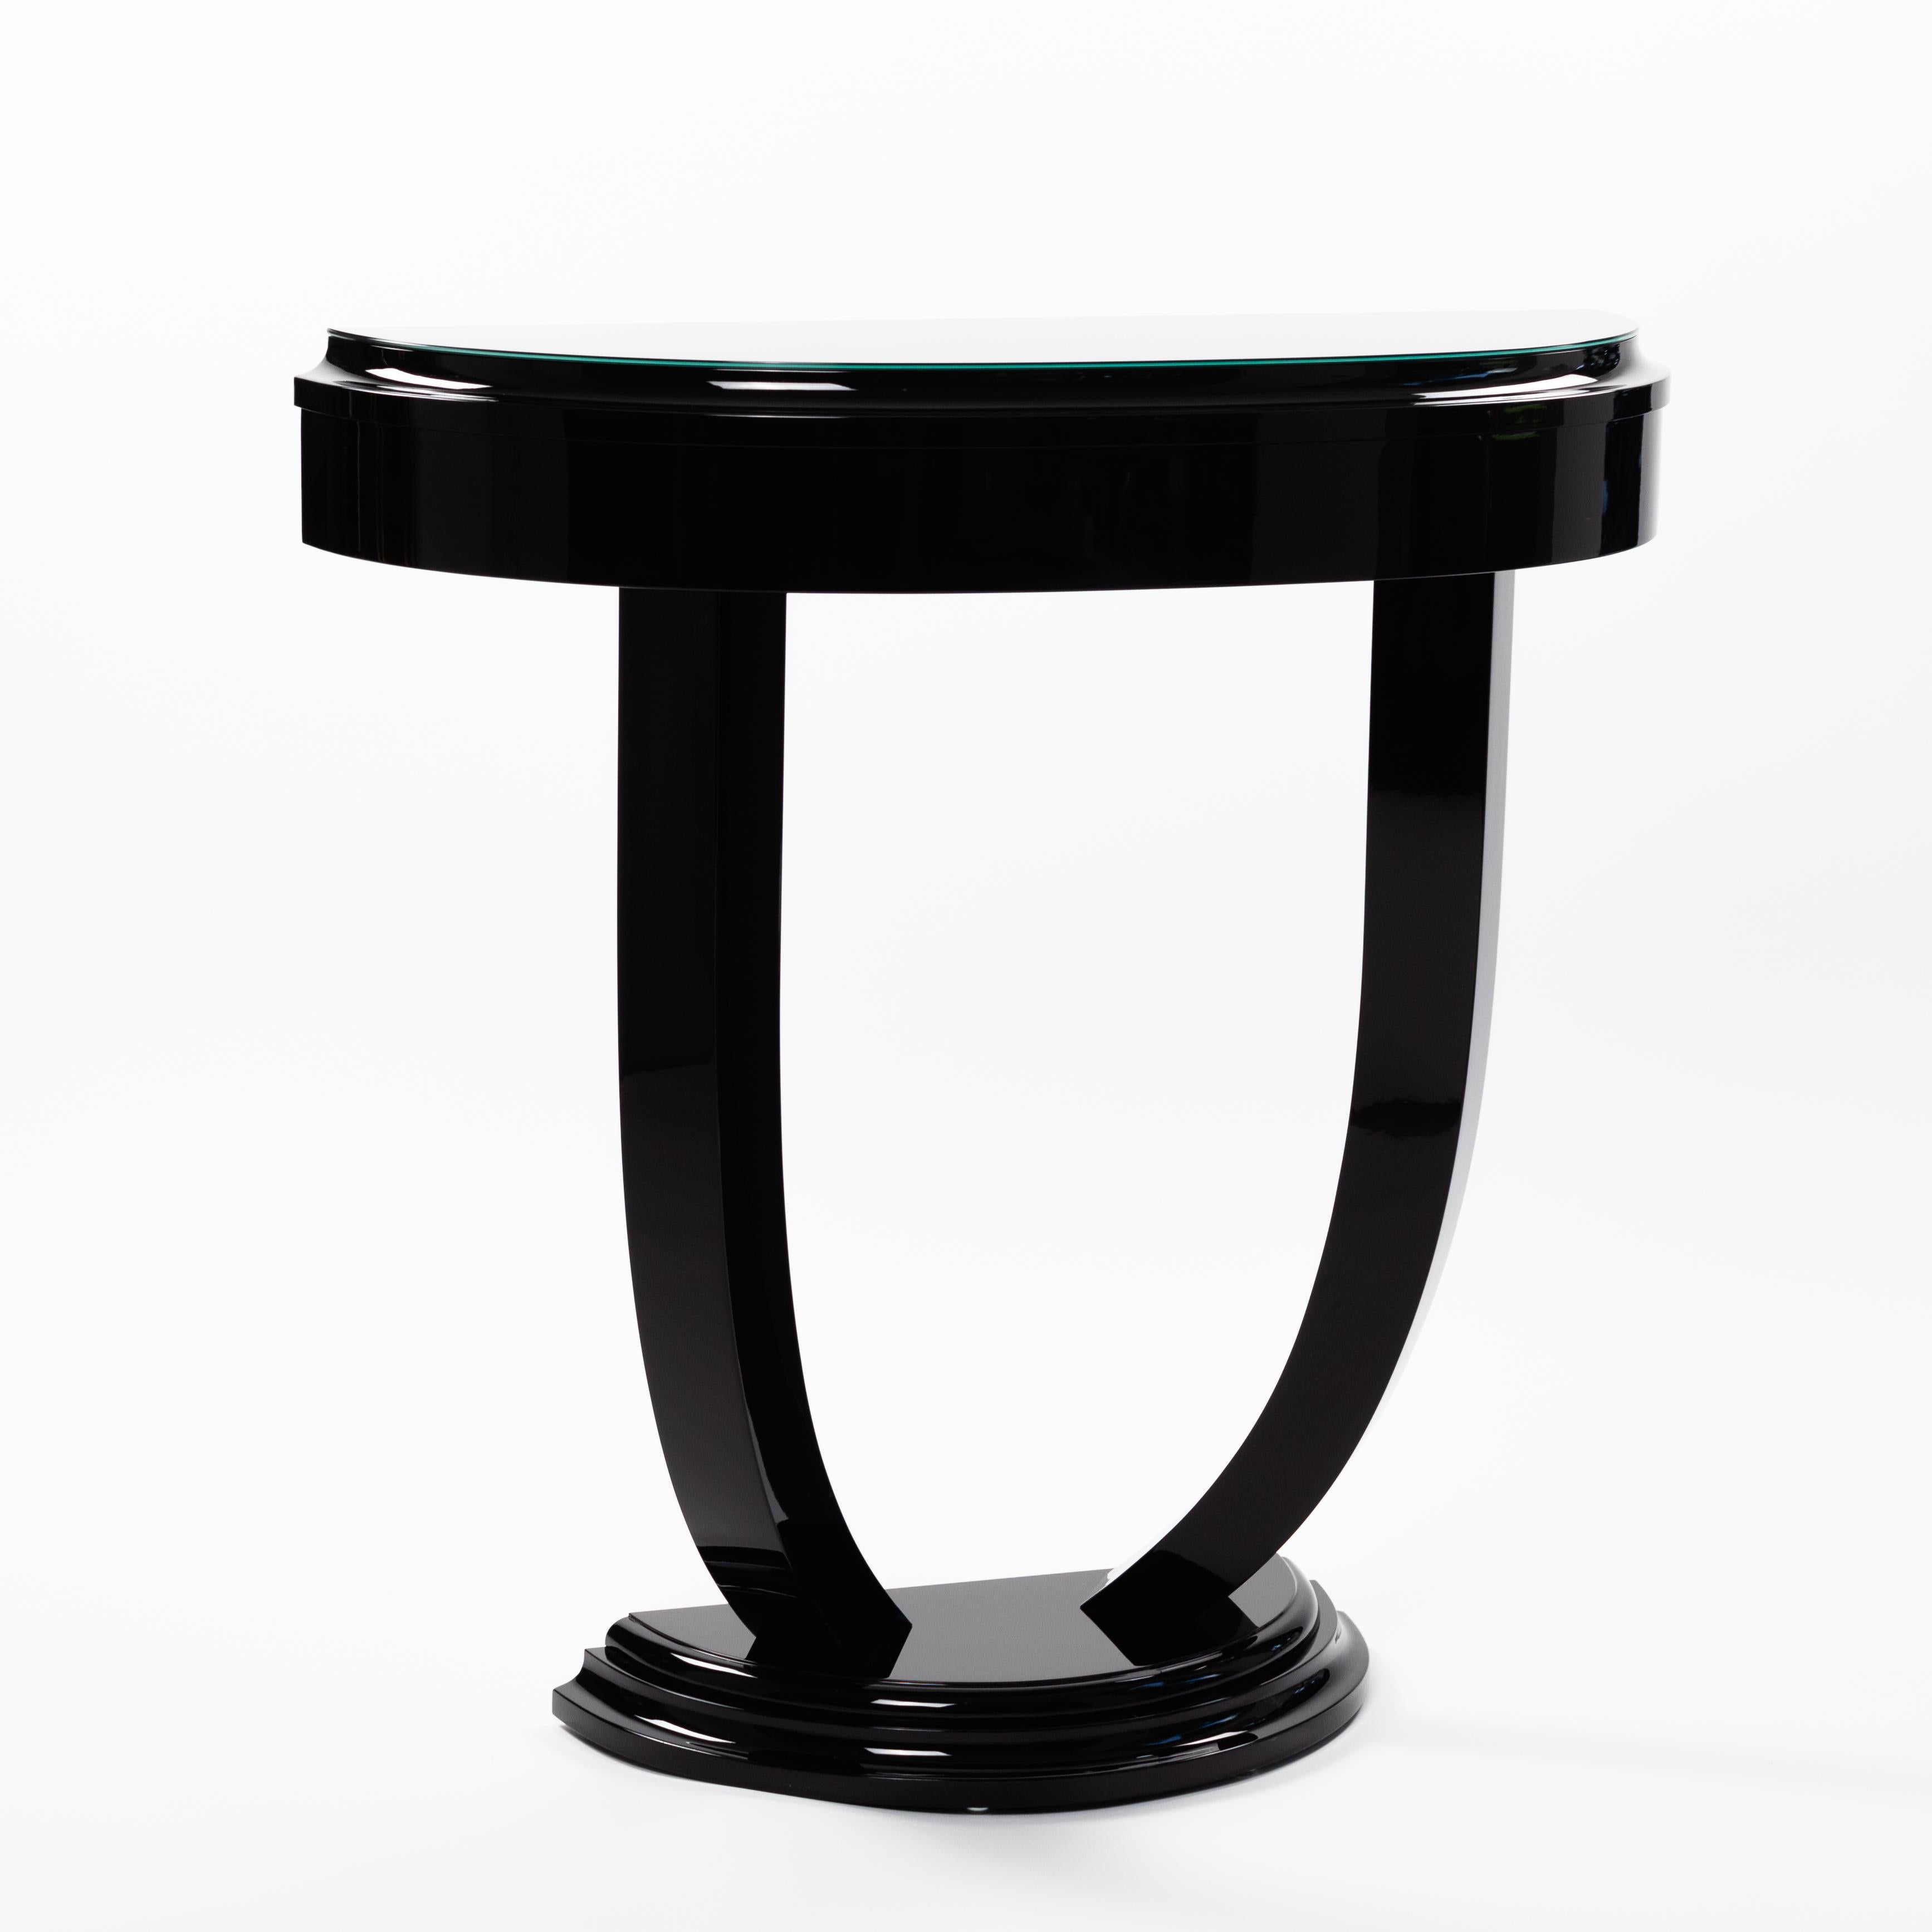 Semicircular Art Déco console black piano lacquer, black glass top plate

Elegant, light-footed object in the Art Déco style with a profile between the top and frame, profiled base. 
The black glass top was made to protect the cover plate and is